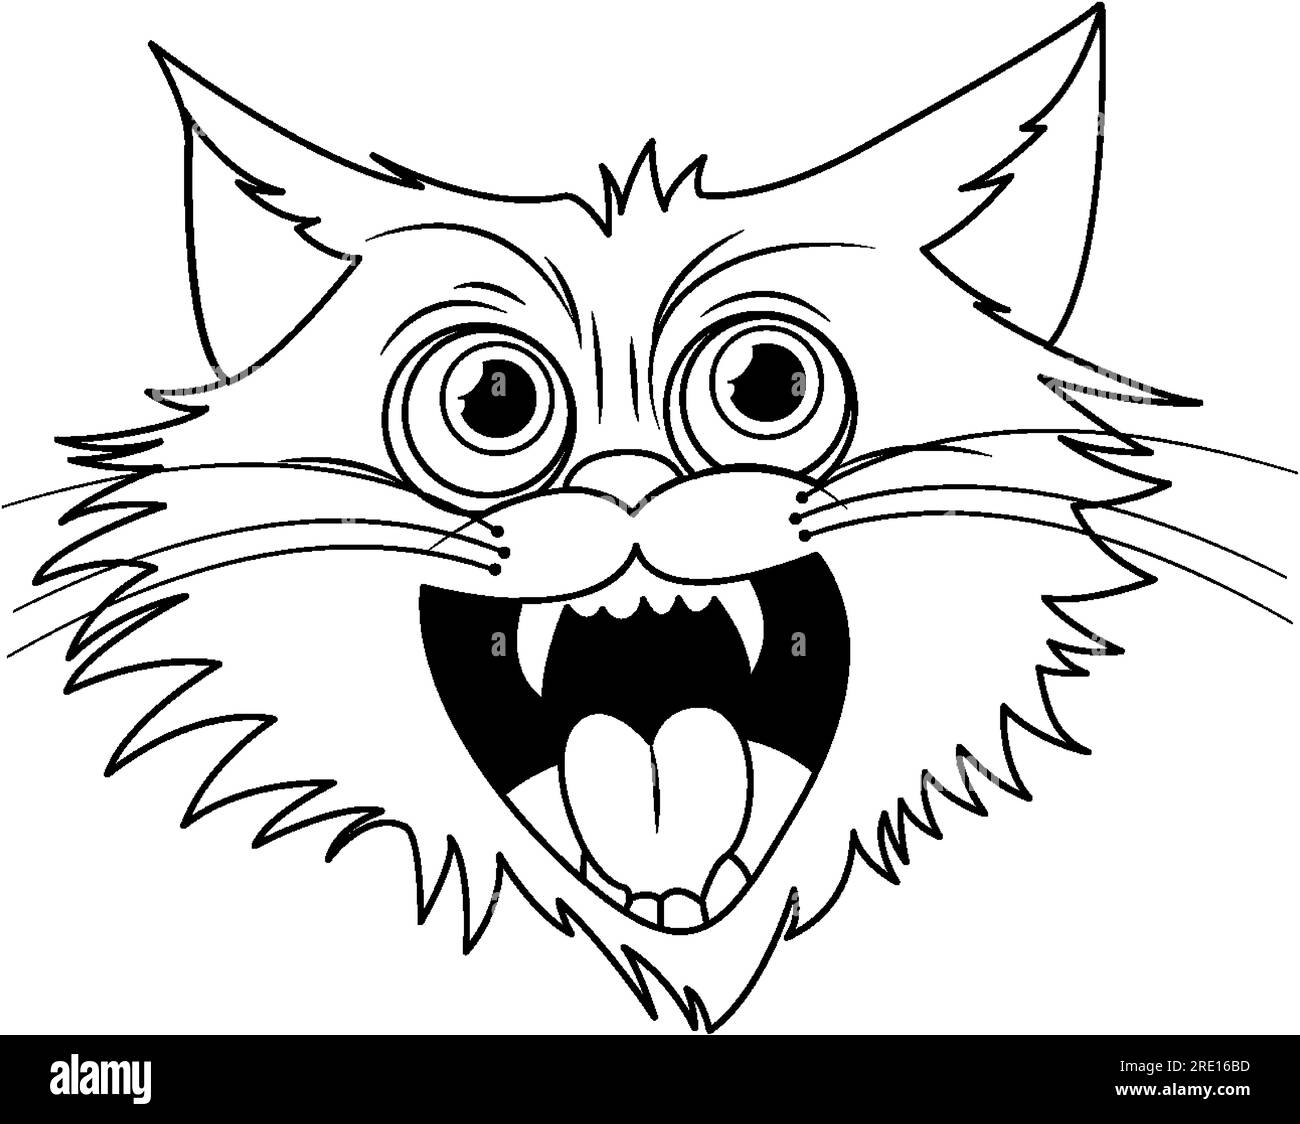 An isolated vector illustration of a fierce cat face on a white background Stock Vector